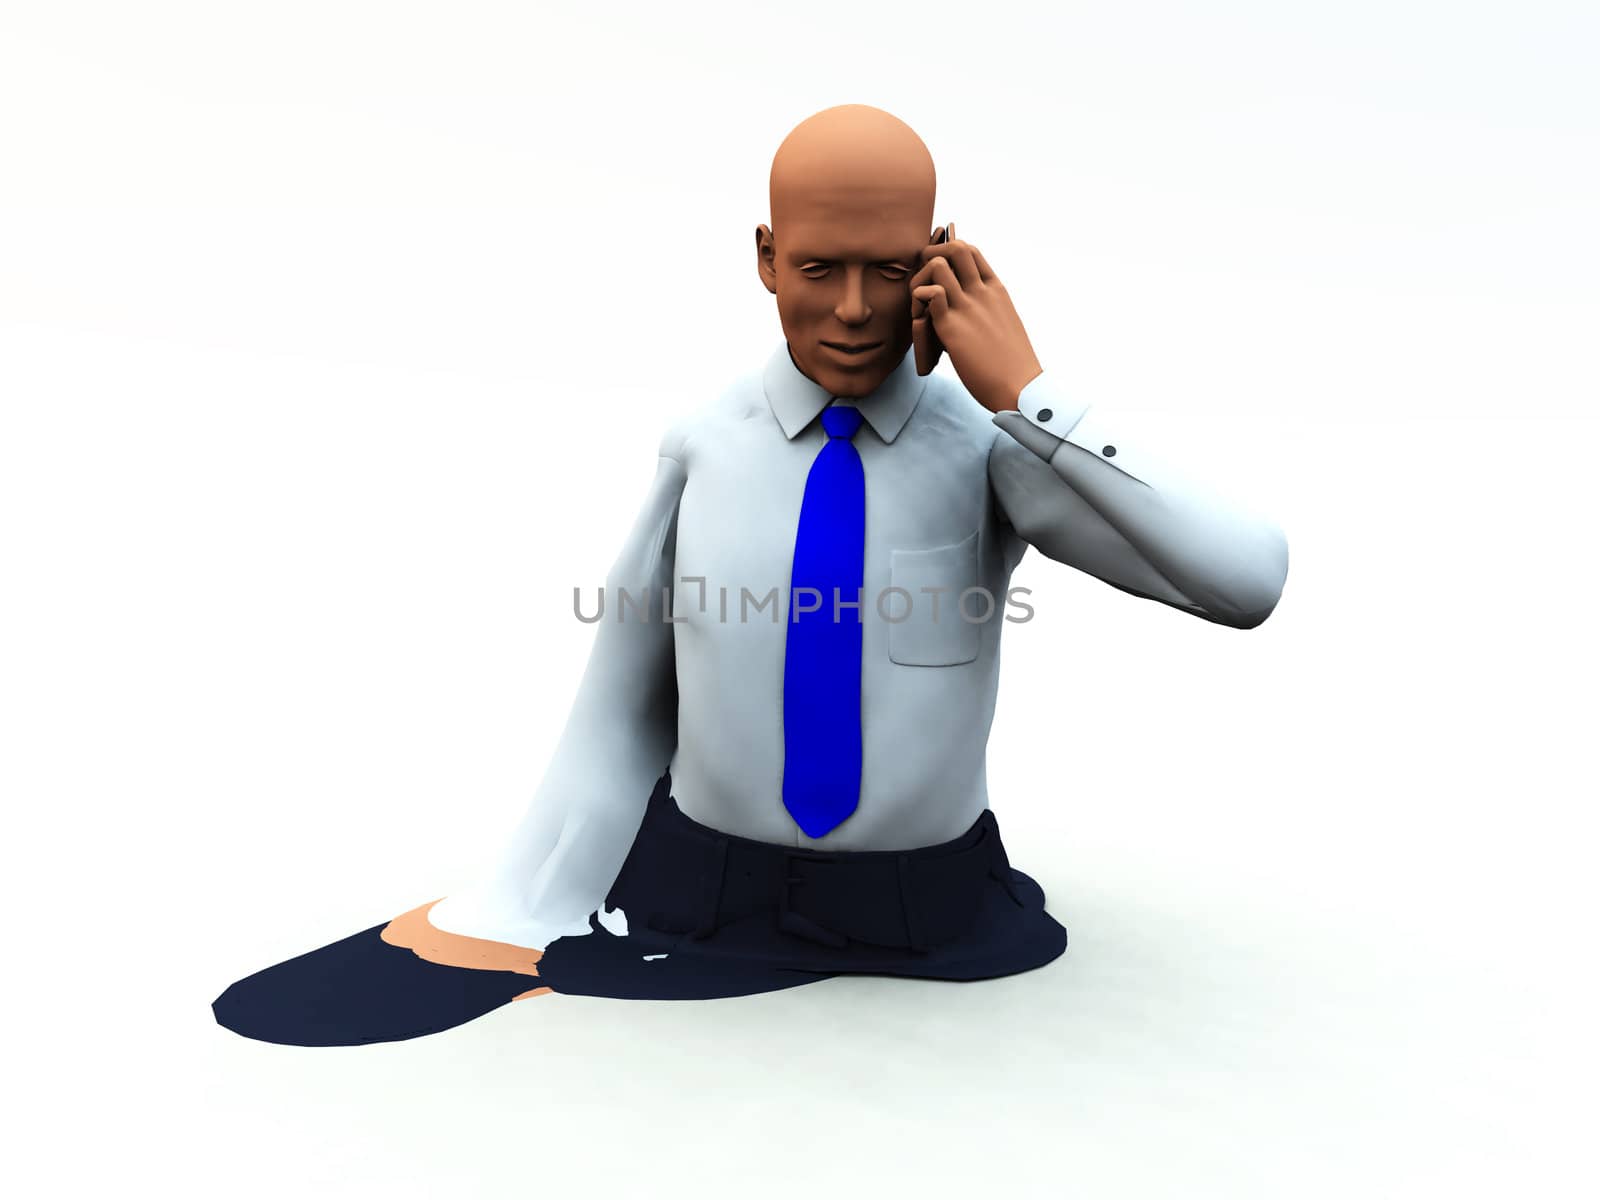 Conceptual image of a businessmen that is melting.